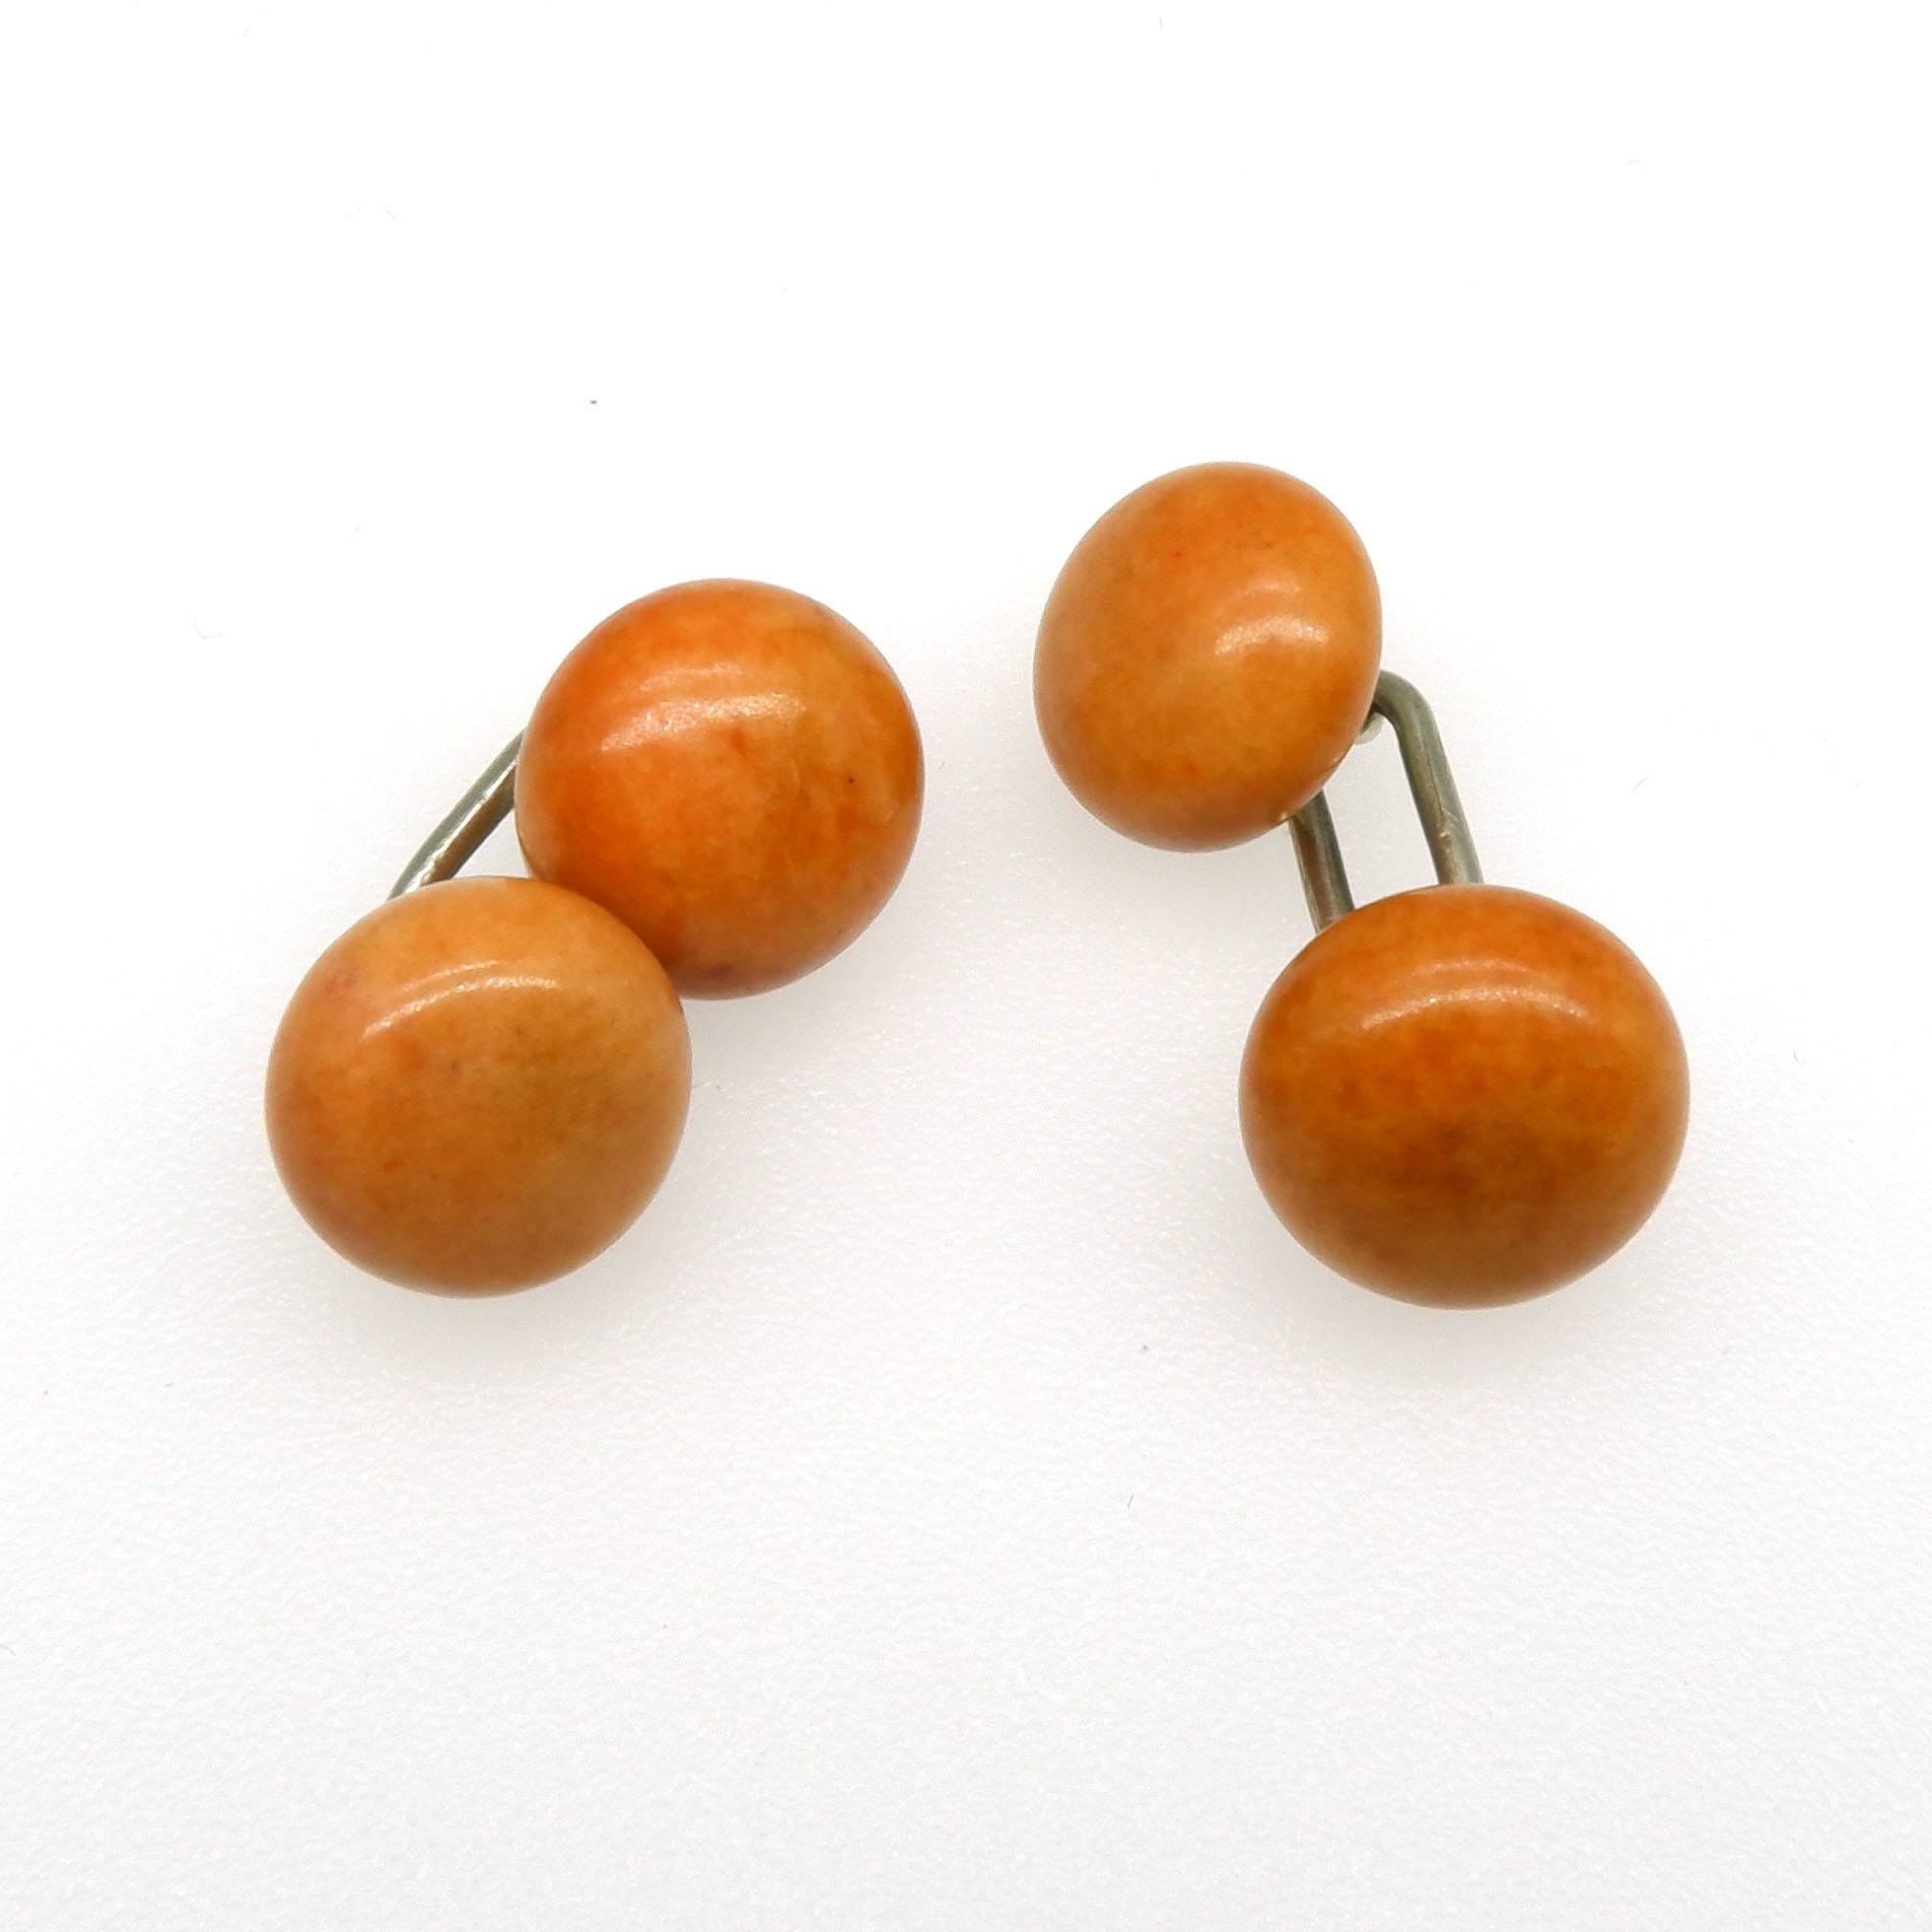 'Sterling Silver Double Ended Cufflinks with Button Shaped Jasper Beads'